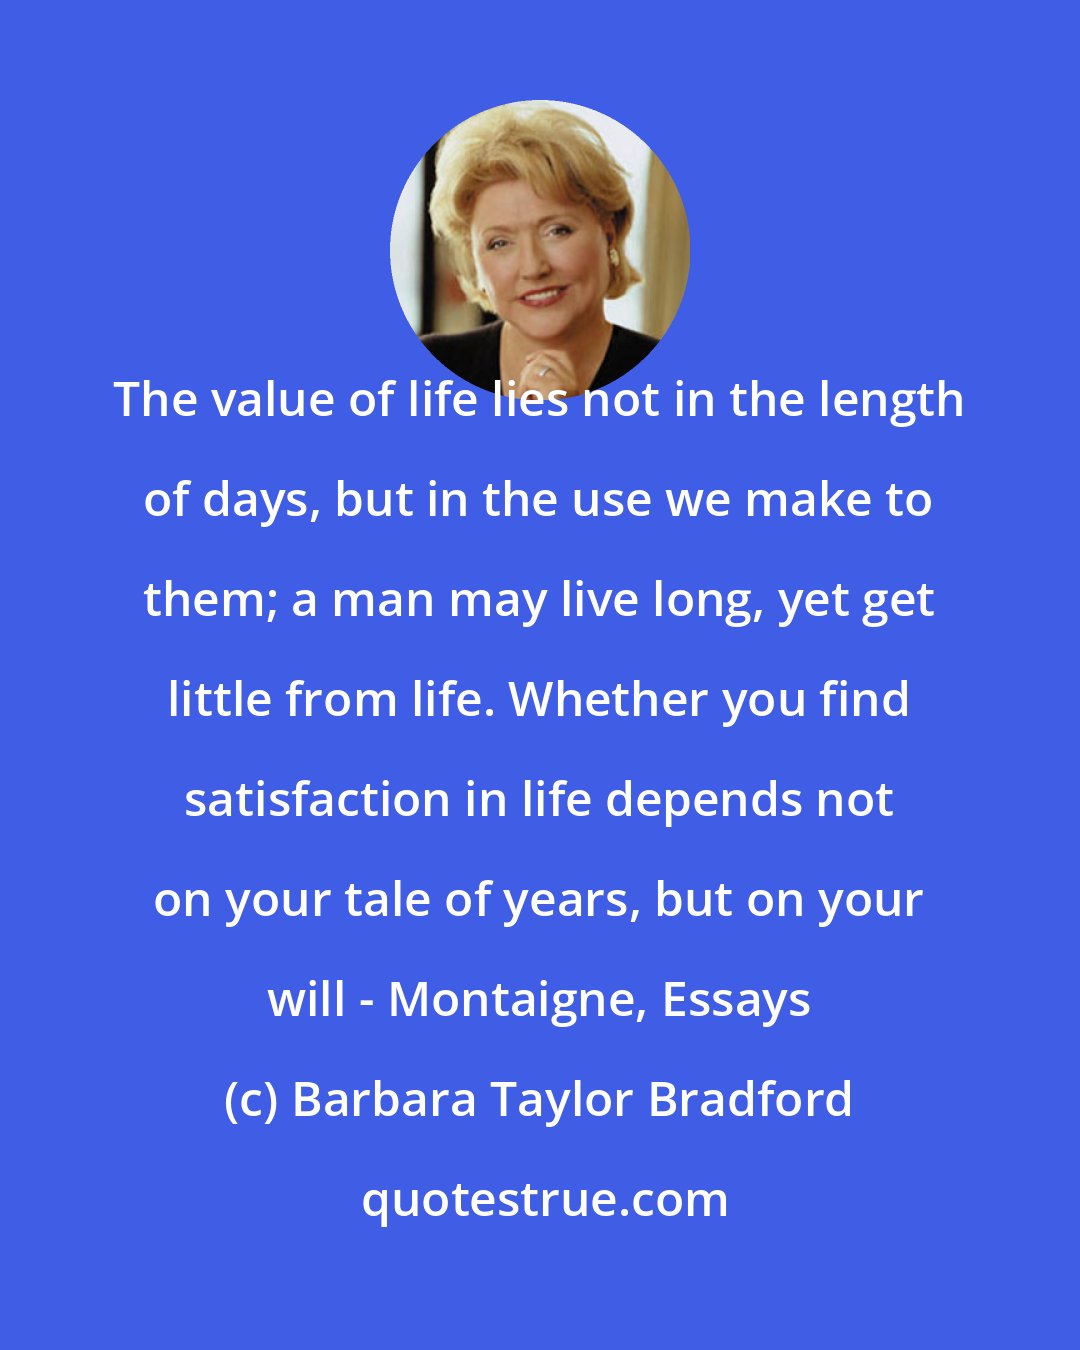 Barbara Taylor Bradford: The value of life lies not in the length of days, but in the use we make to them; a man may live long, yet get little from life. Whether you find satisfaction in life depends not on your tale of years, but on your will - Montaigne, Essays